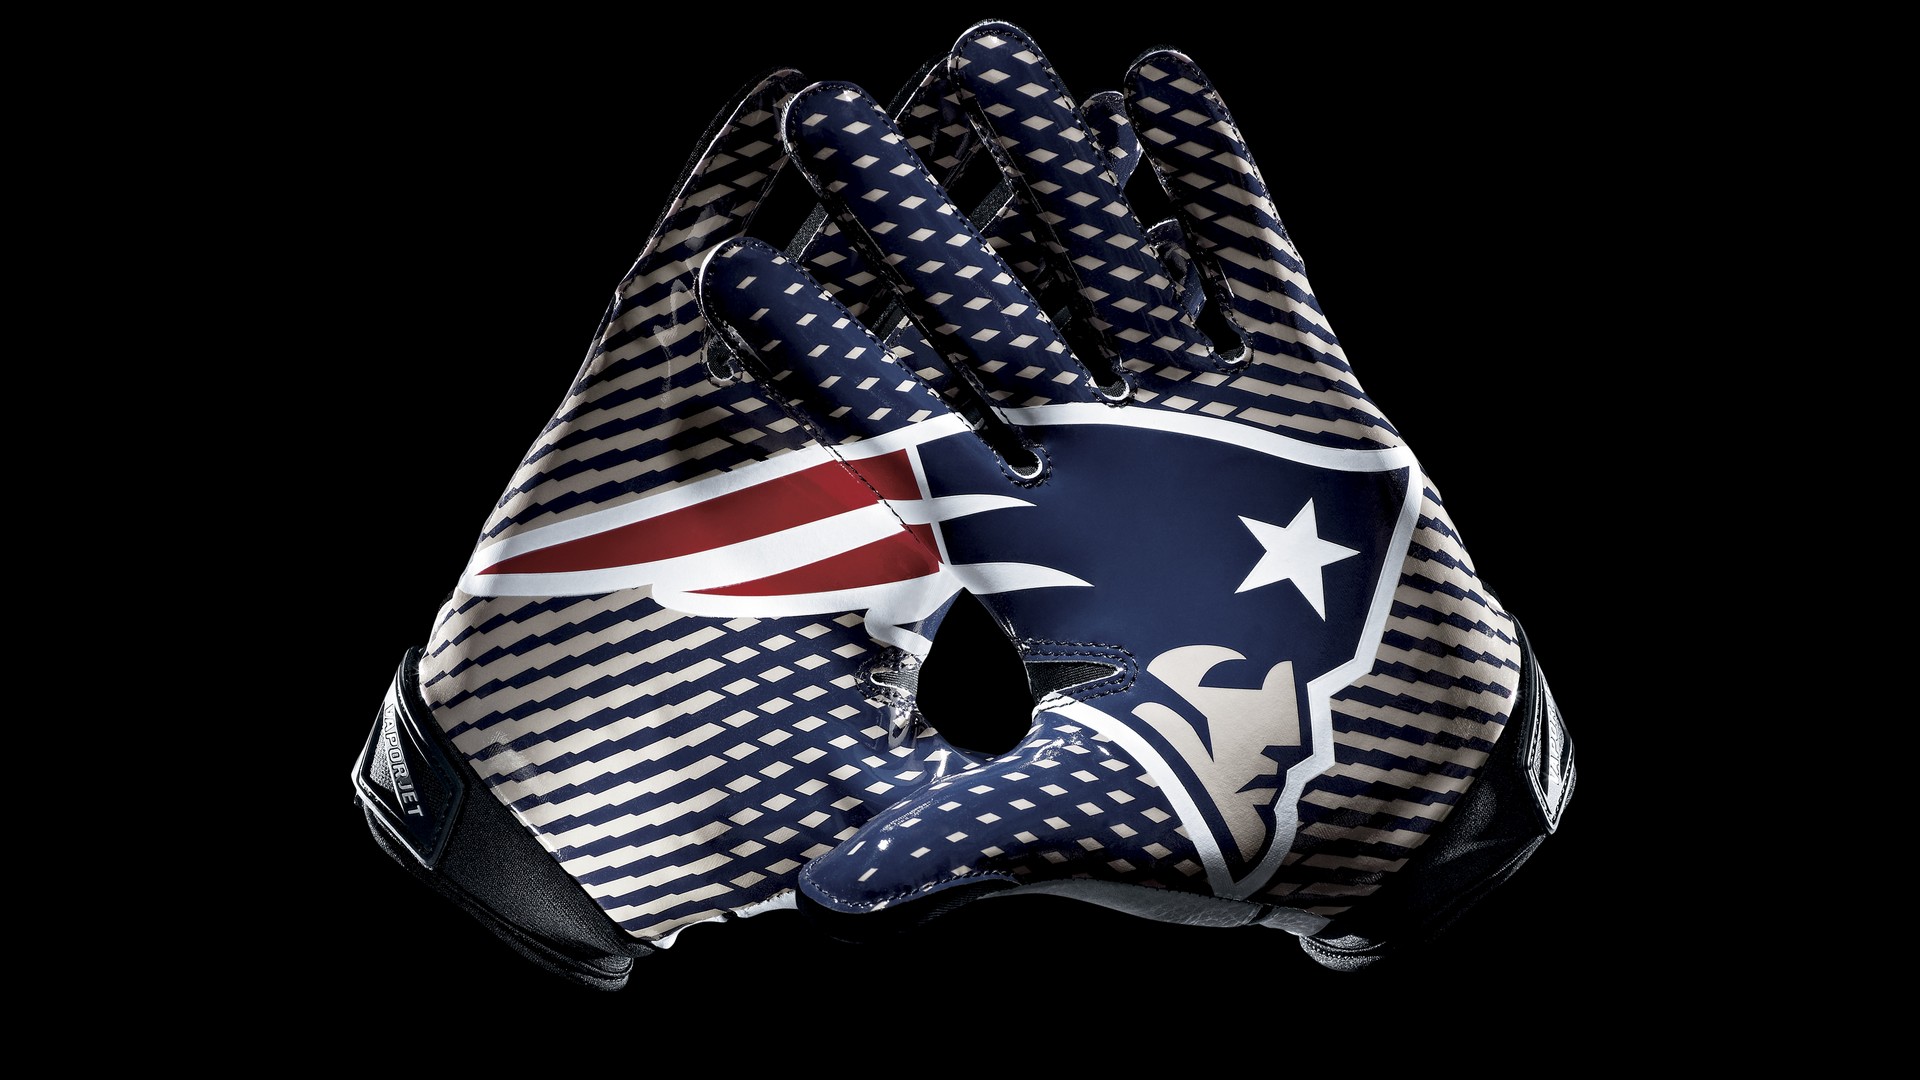 New England Patriots Wallpaper For Mac Backgrounds With Resolution 1920X1080 pixel. You can make this wallpaper for your Mac or Windows Desktop Background, iPhone, Android or Tablet and another Smartphone device for free